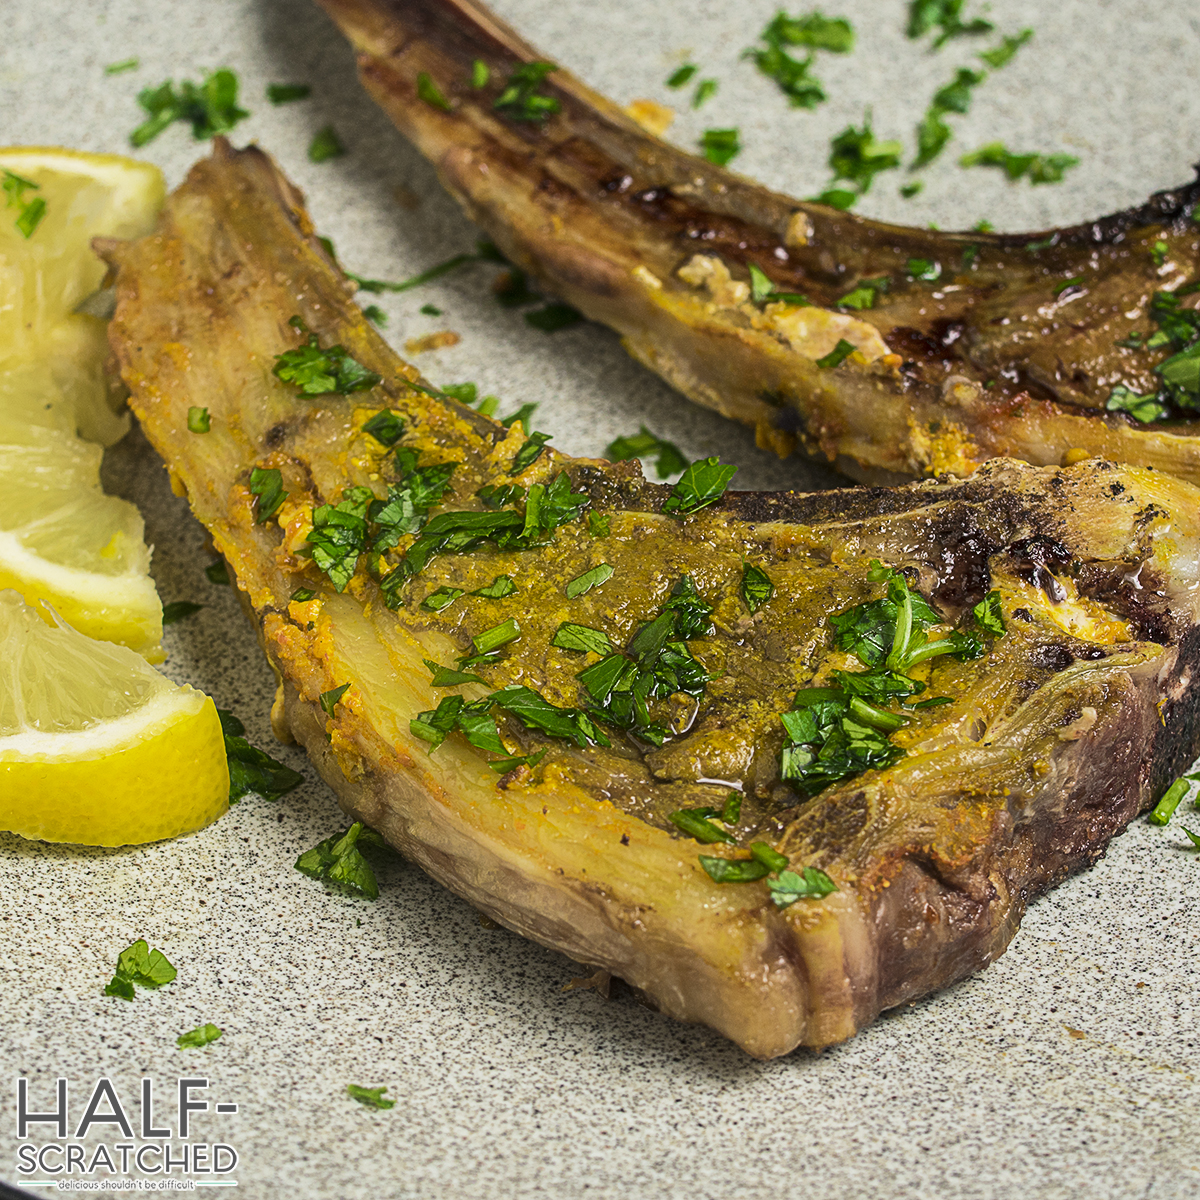 Cooked lamb chops garnished with parsley and lemon slices